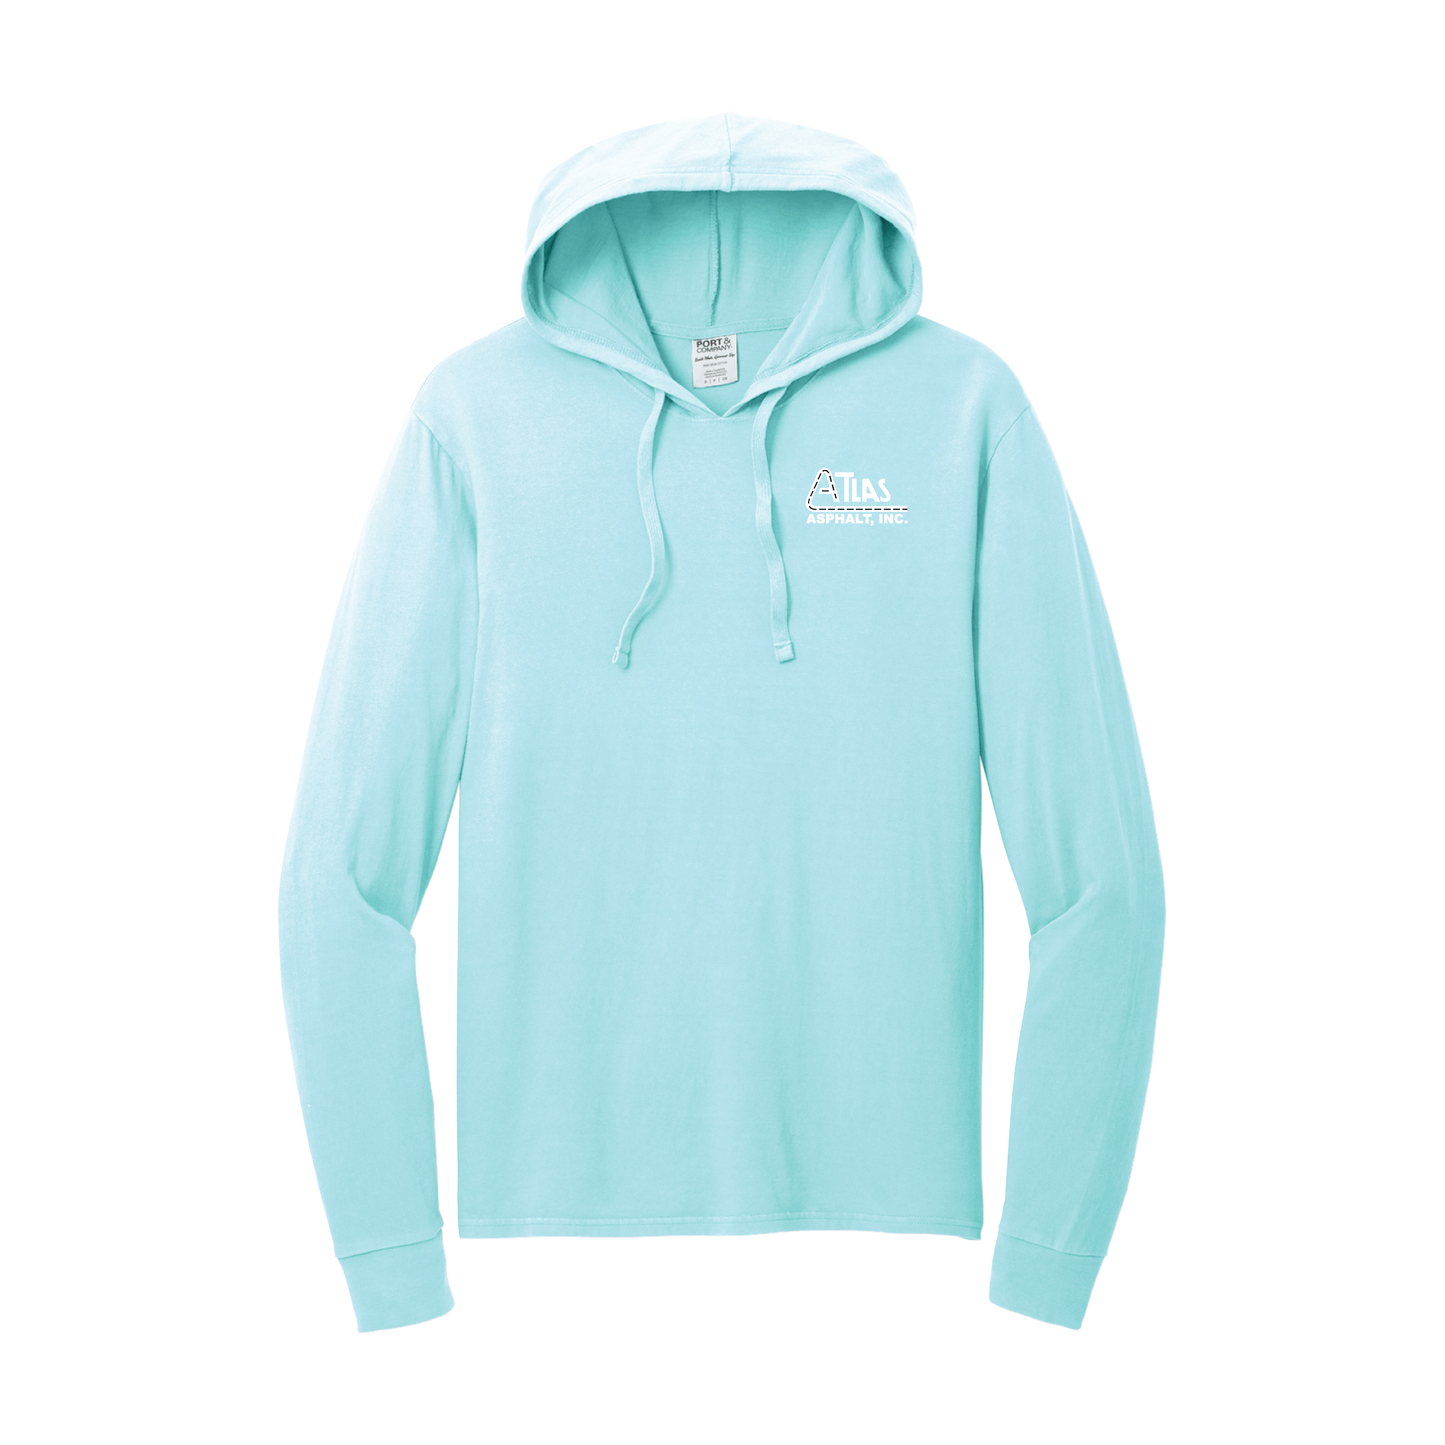 Port & Company Beach Wash Garment-Dyed Pullover Hooded Tee - Atlas